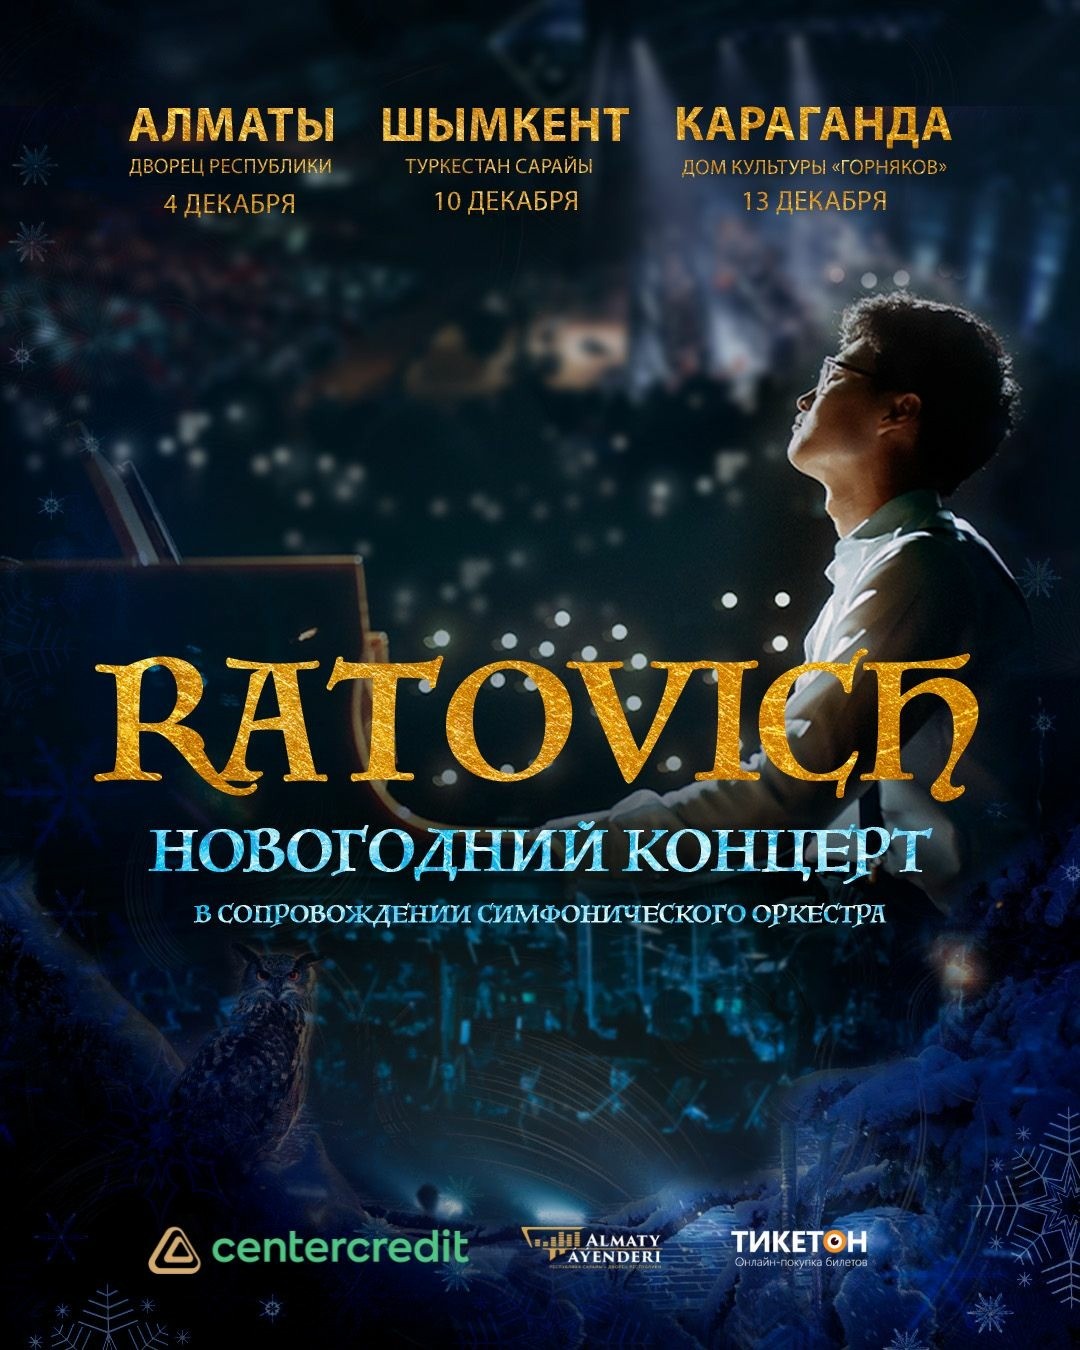 Ratovich «New Year's Concert» in Shymkent